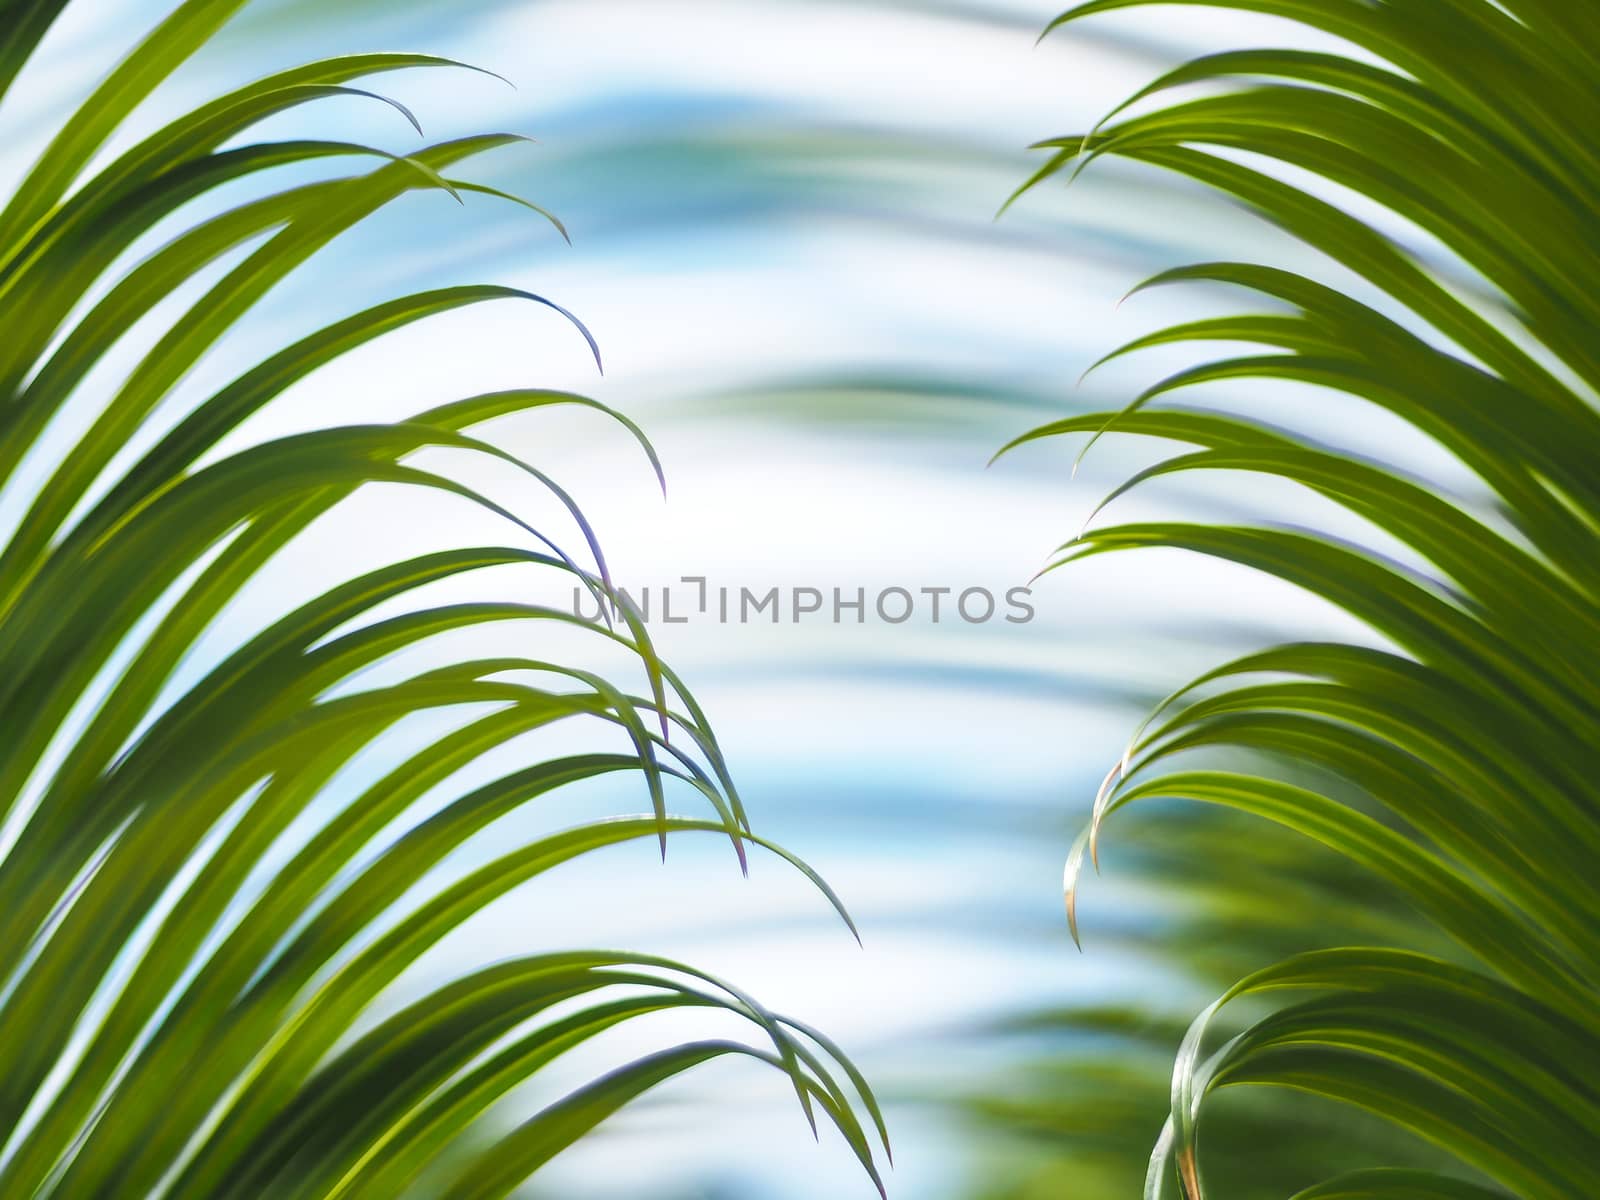 pattern of green palm leaves with blue sky